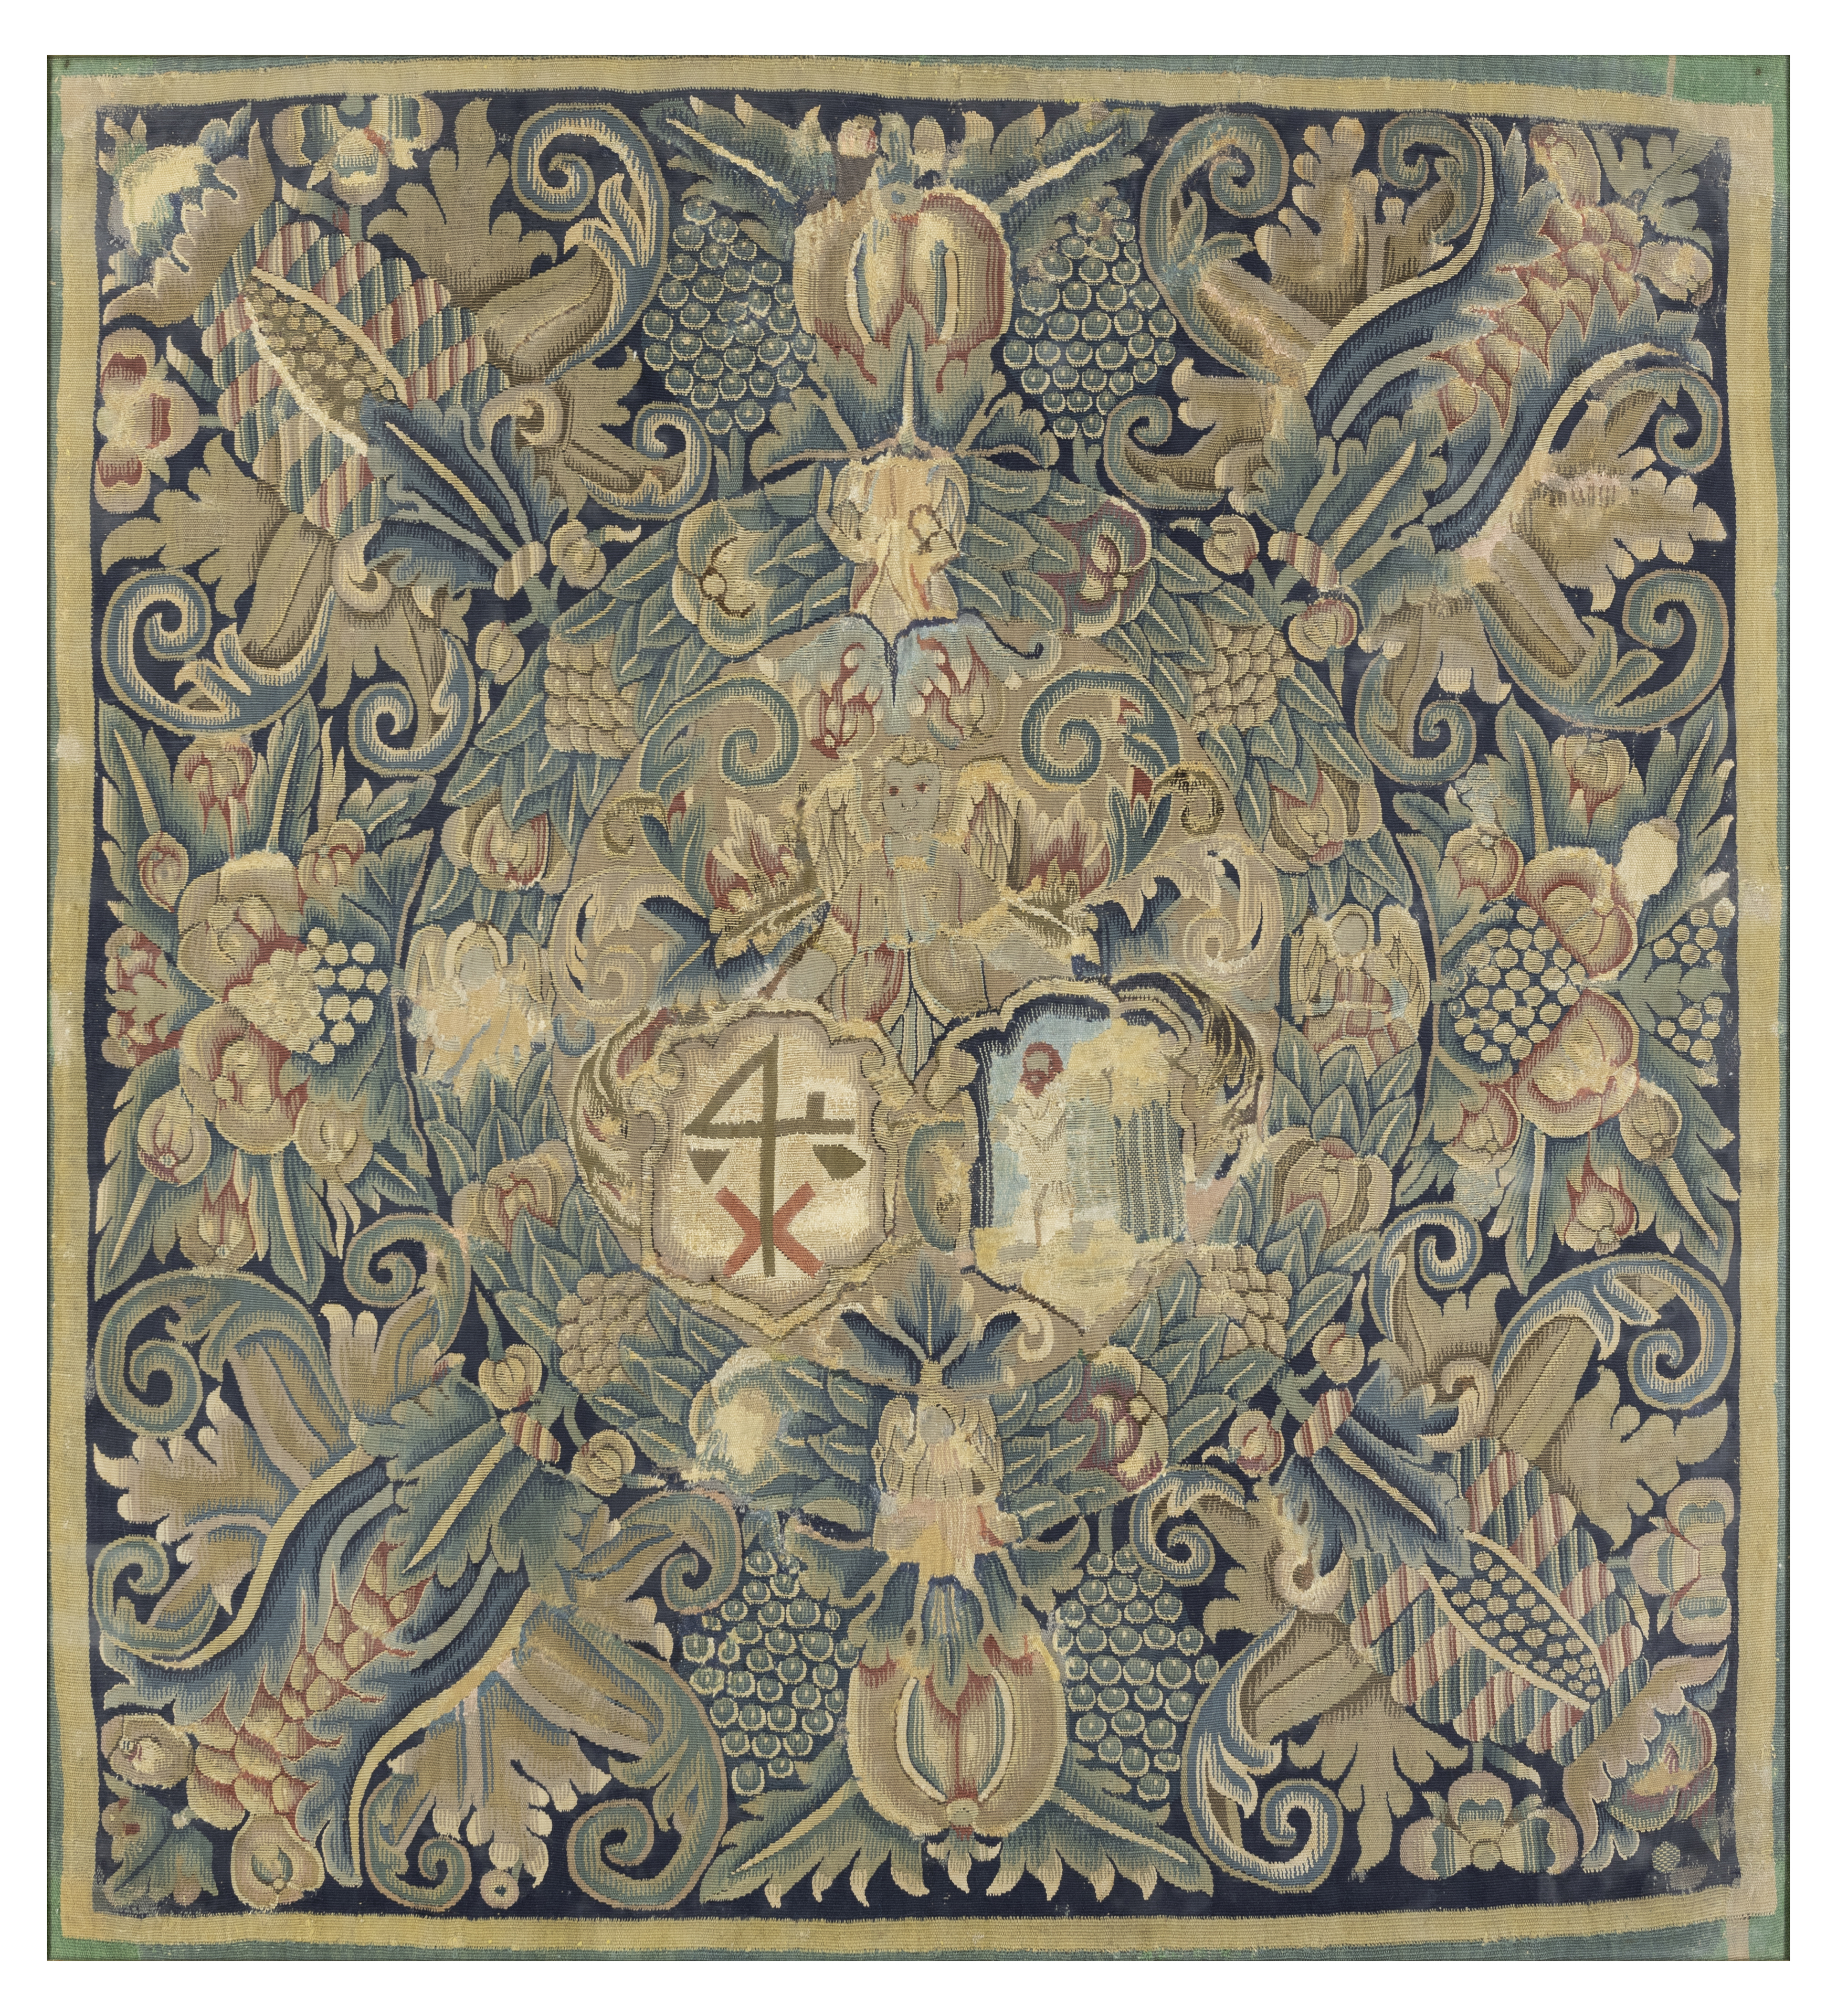 A North German armorial tapestry panel,  Mid-17th century,  Woven in wools and silks, with an ang...